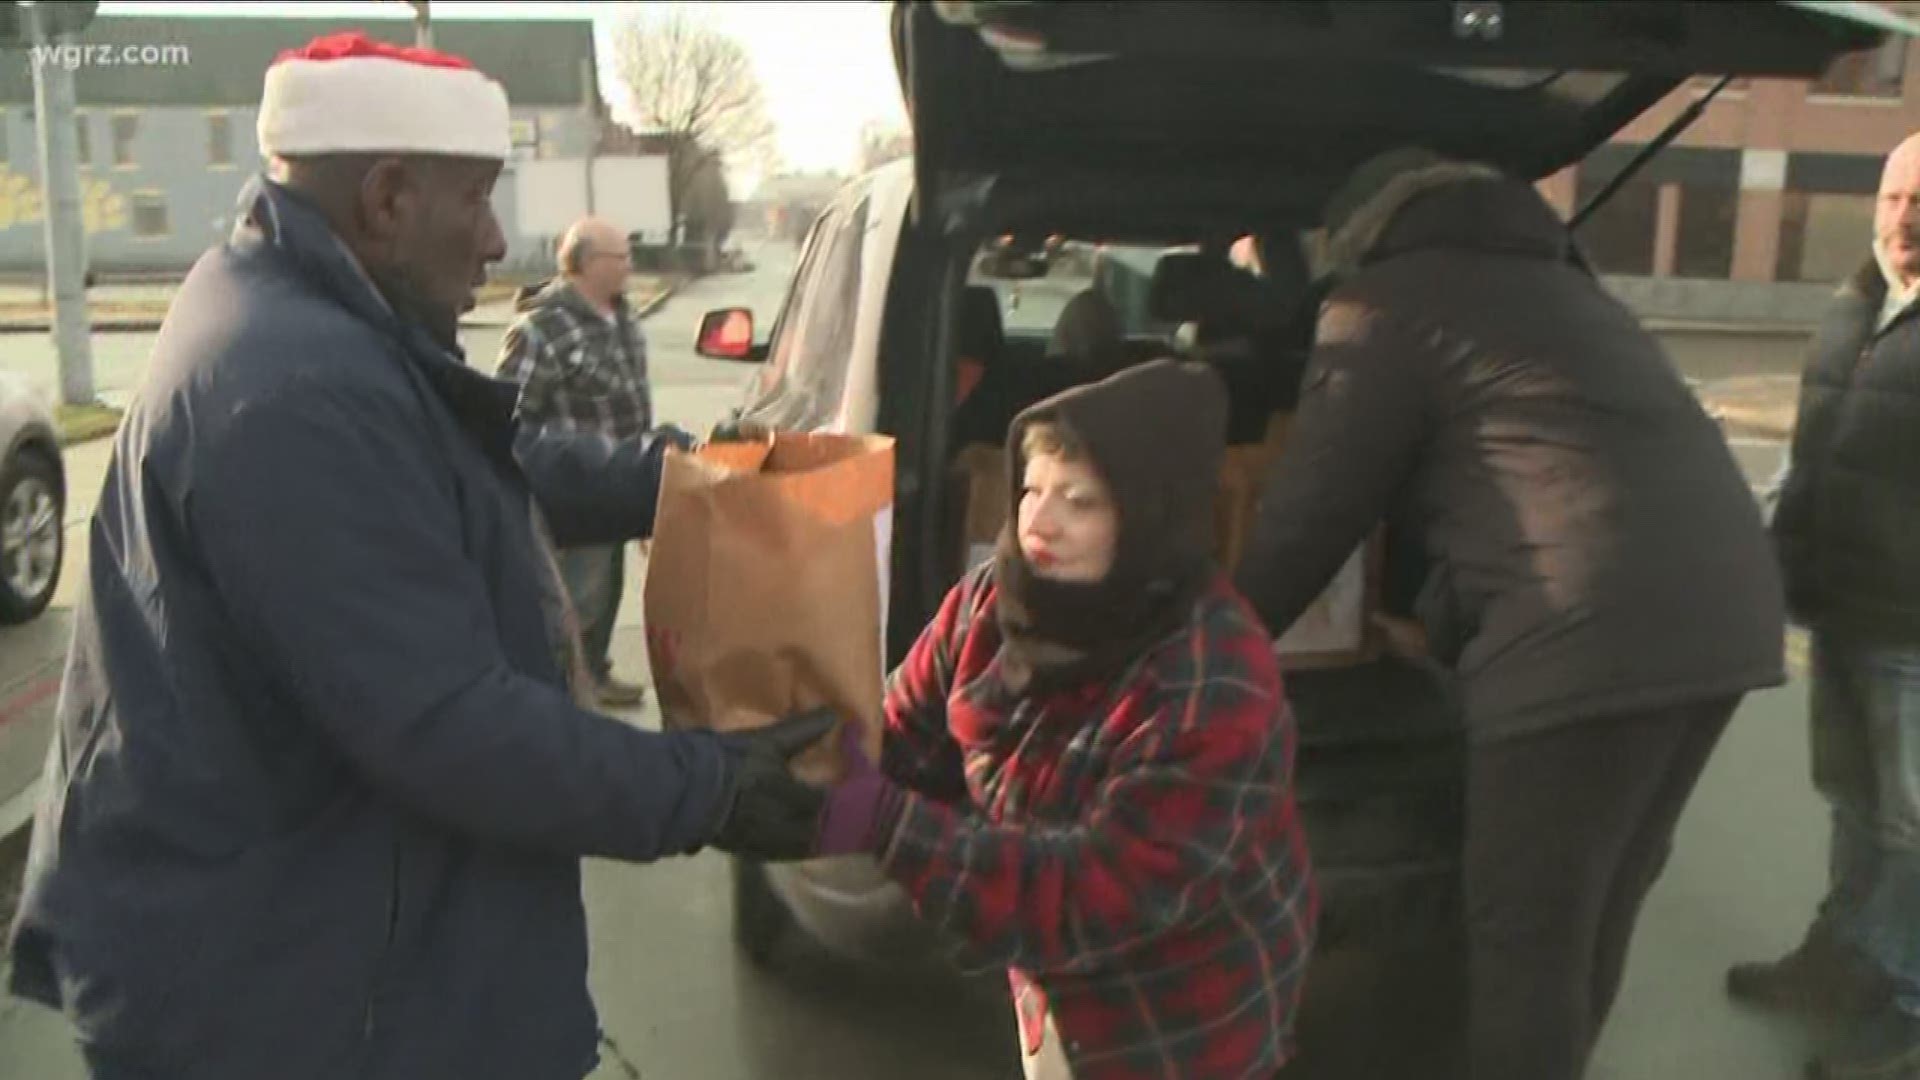 Hambone Express fed thousands across Western New York thanks to more than two-hundred volunteers at the Buffalo City Mission, delivery more than 3 thousand meals.